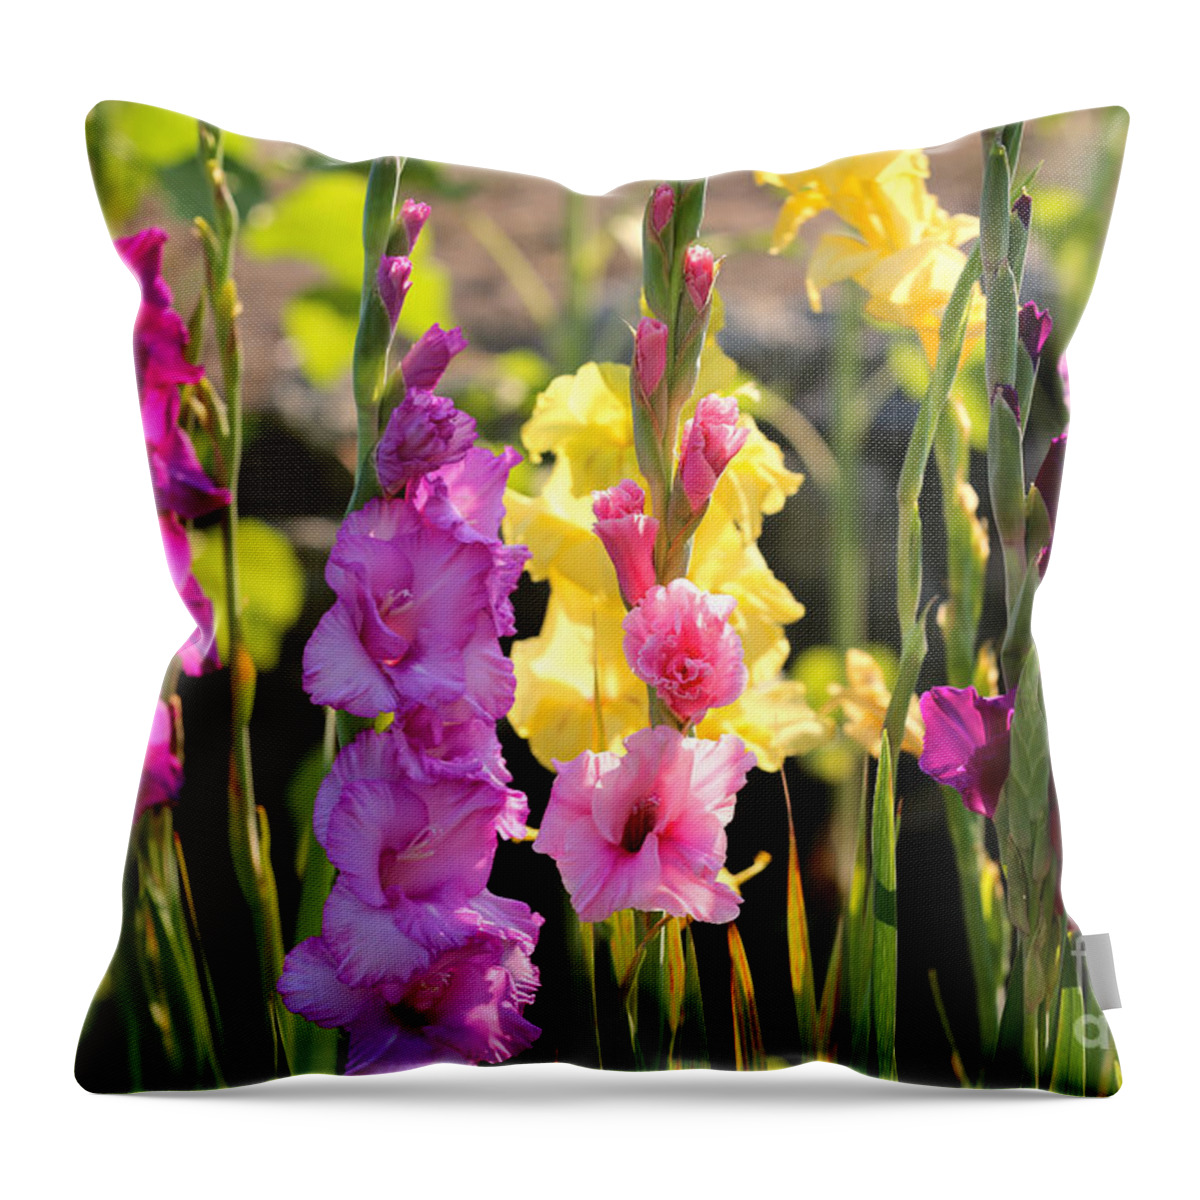 Glads Throw Pillow featuring the photograph Multi Colored Gladiolus by Carol Groenen